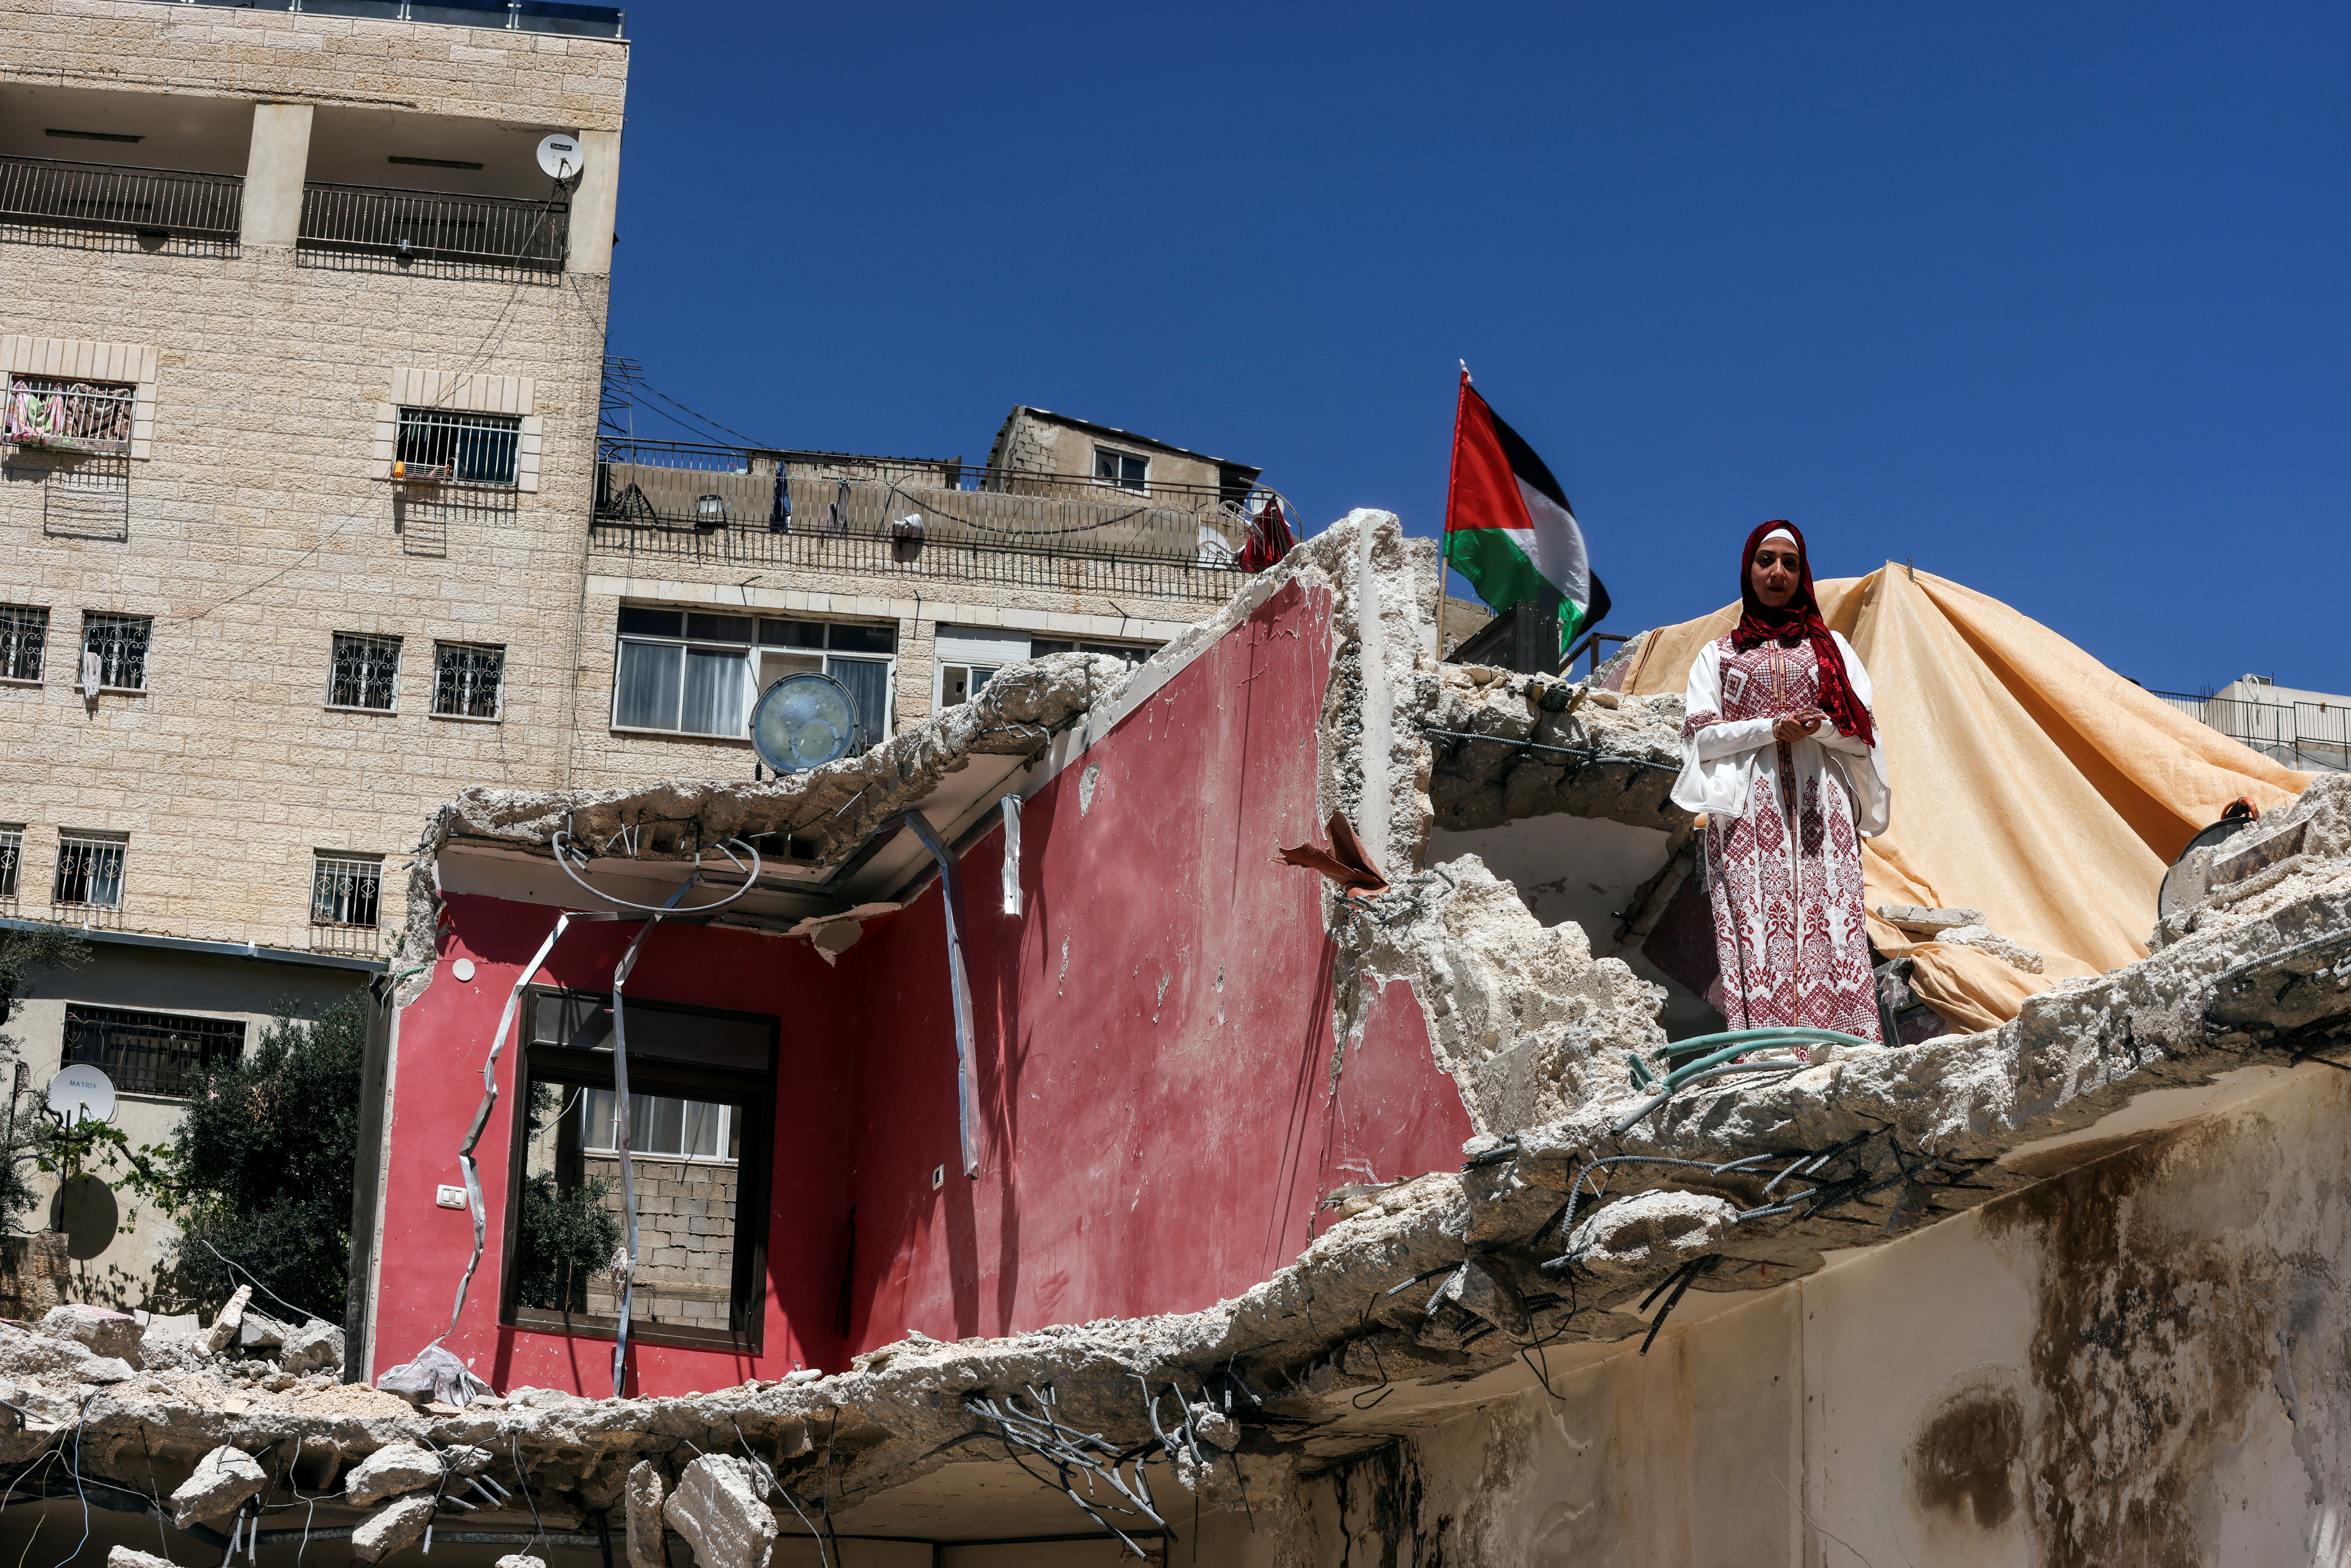 Palestinian bride Rabeha Al-Rajabi stands on the debris her house, that was partly demolished by Israeli authority, as part of her pre-wedding ceremony in East Jerusalem